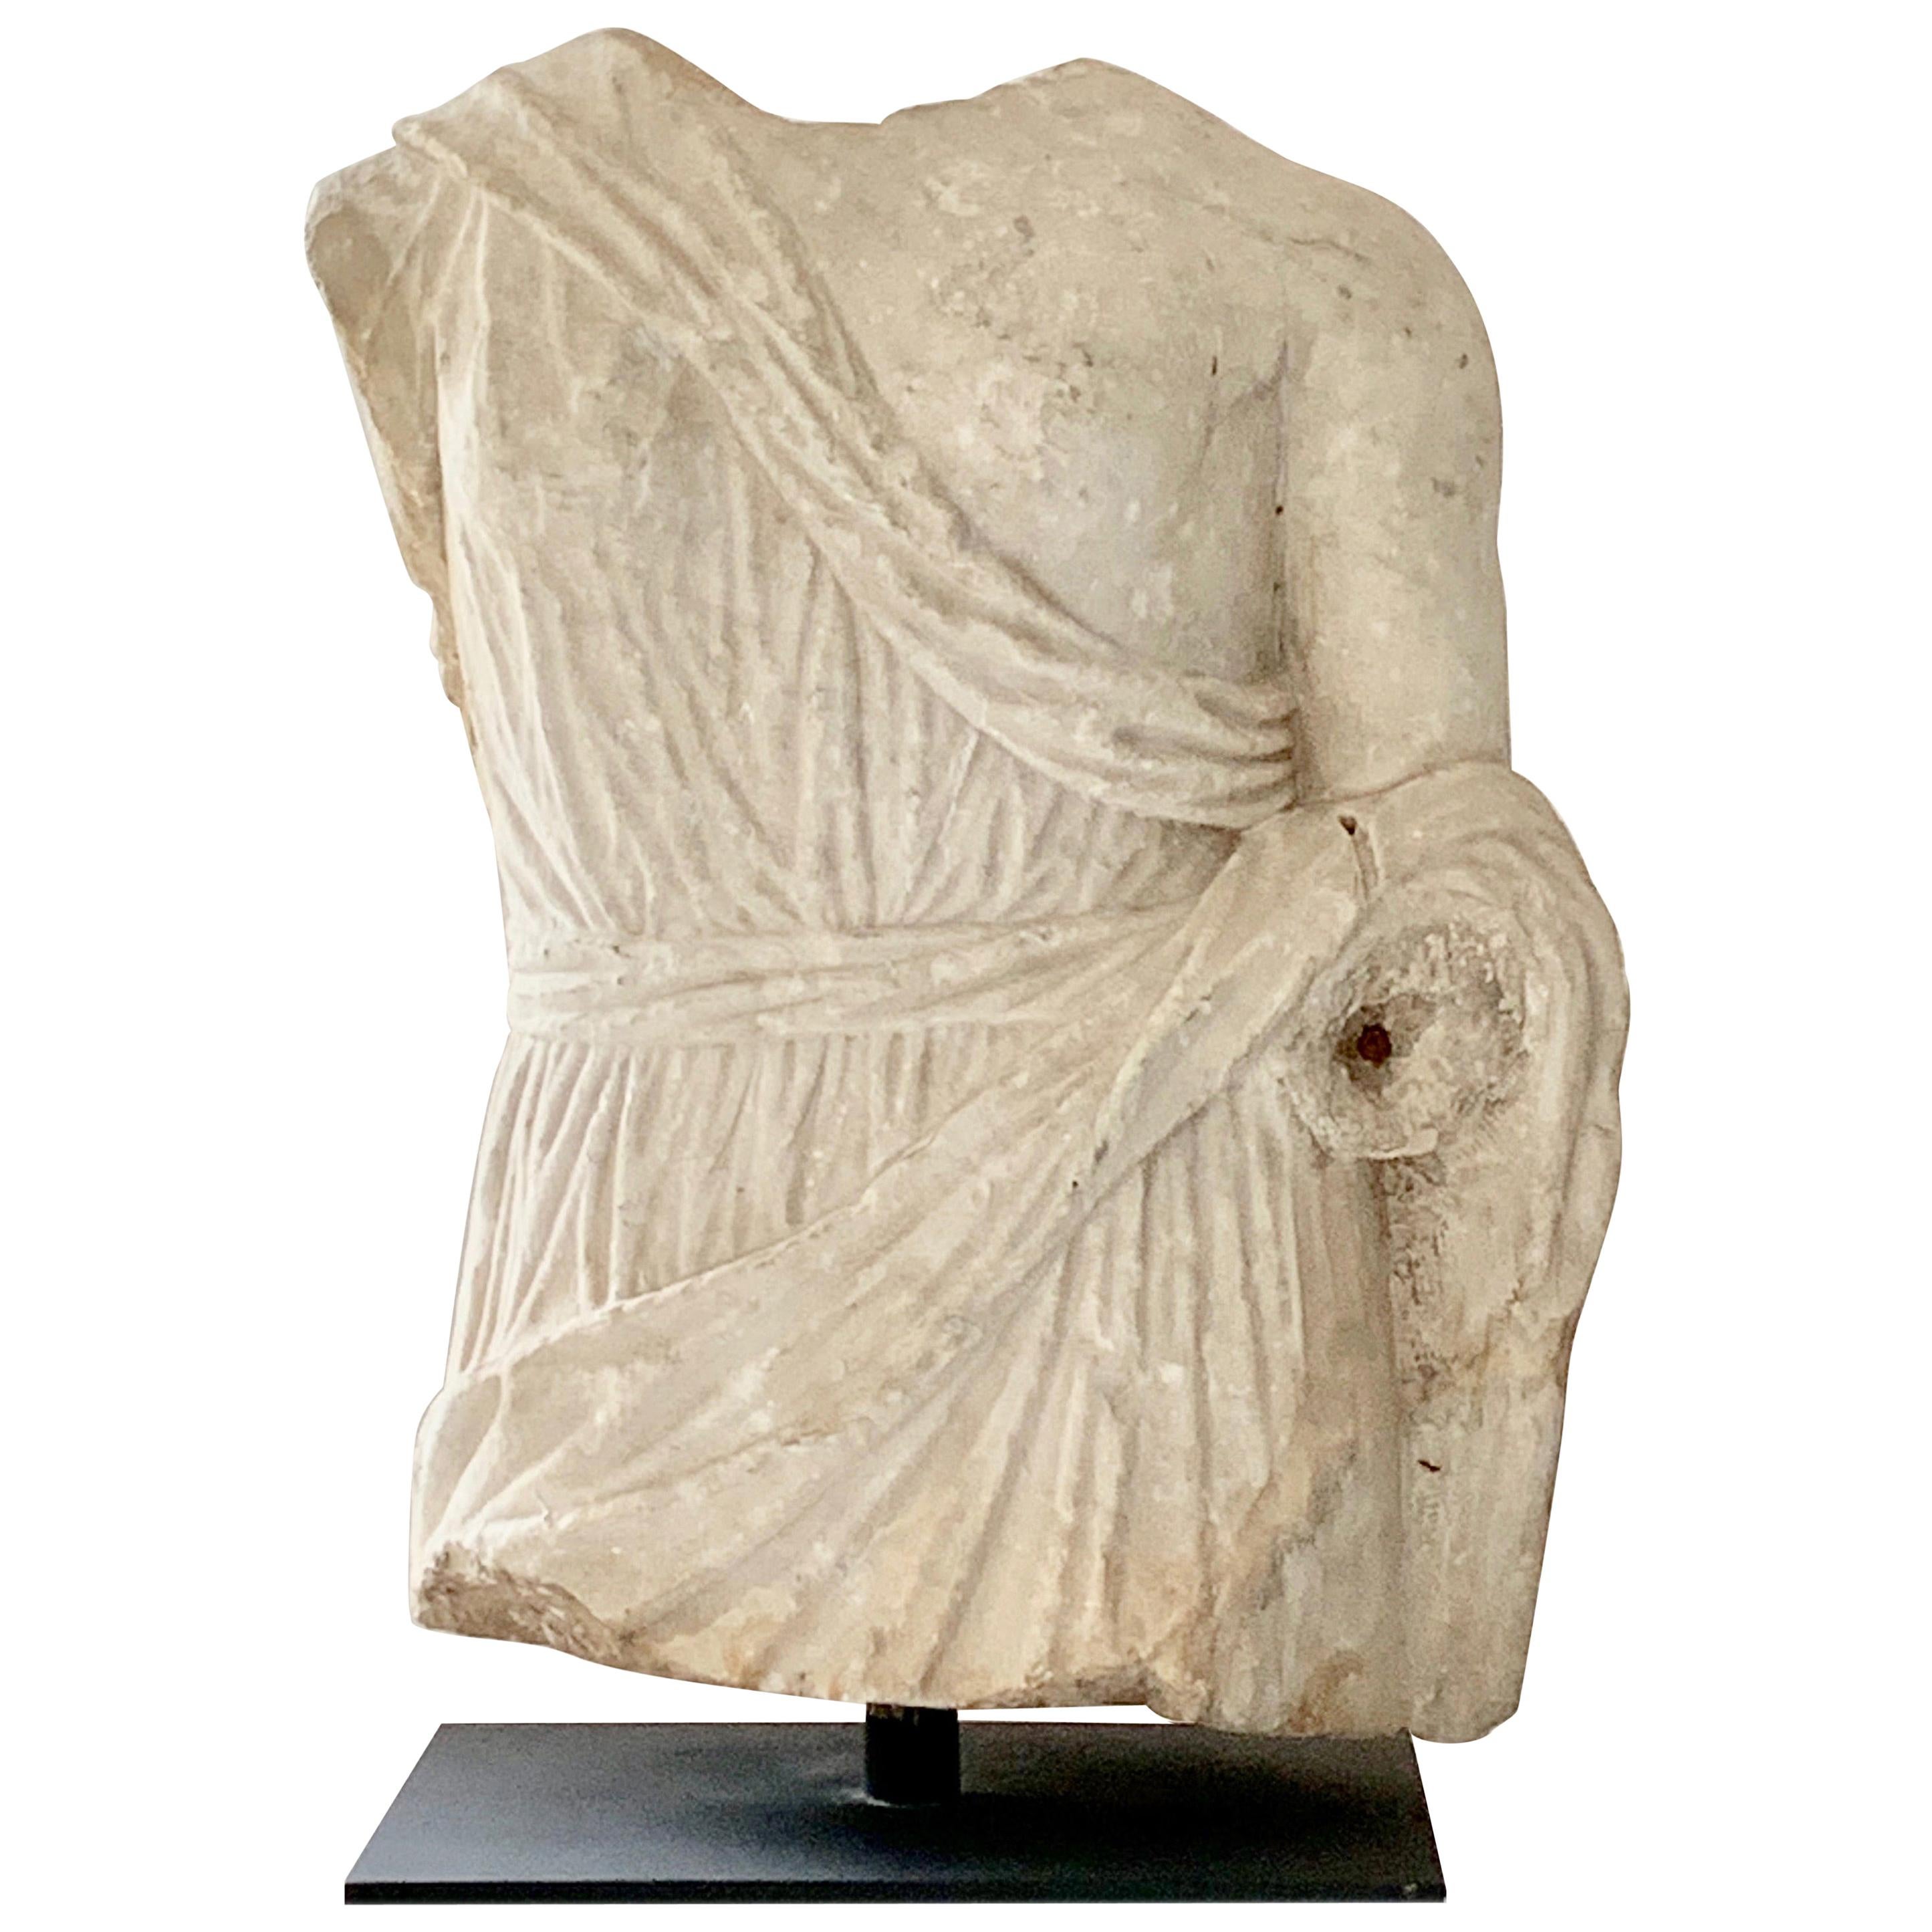 Marble Roman Antiquities Sculpture of the Goddess Fortuna, 2nd Century AD, Spain